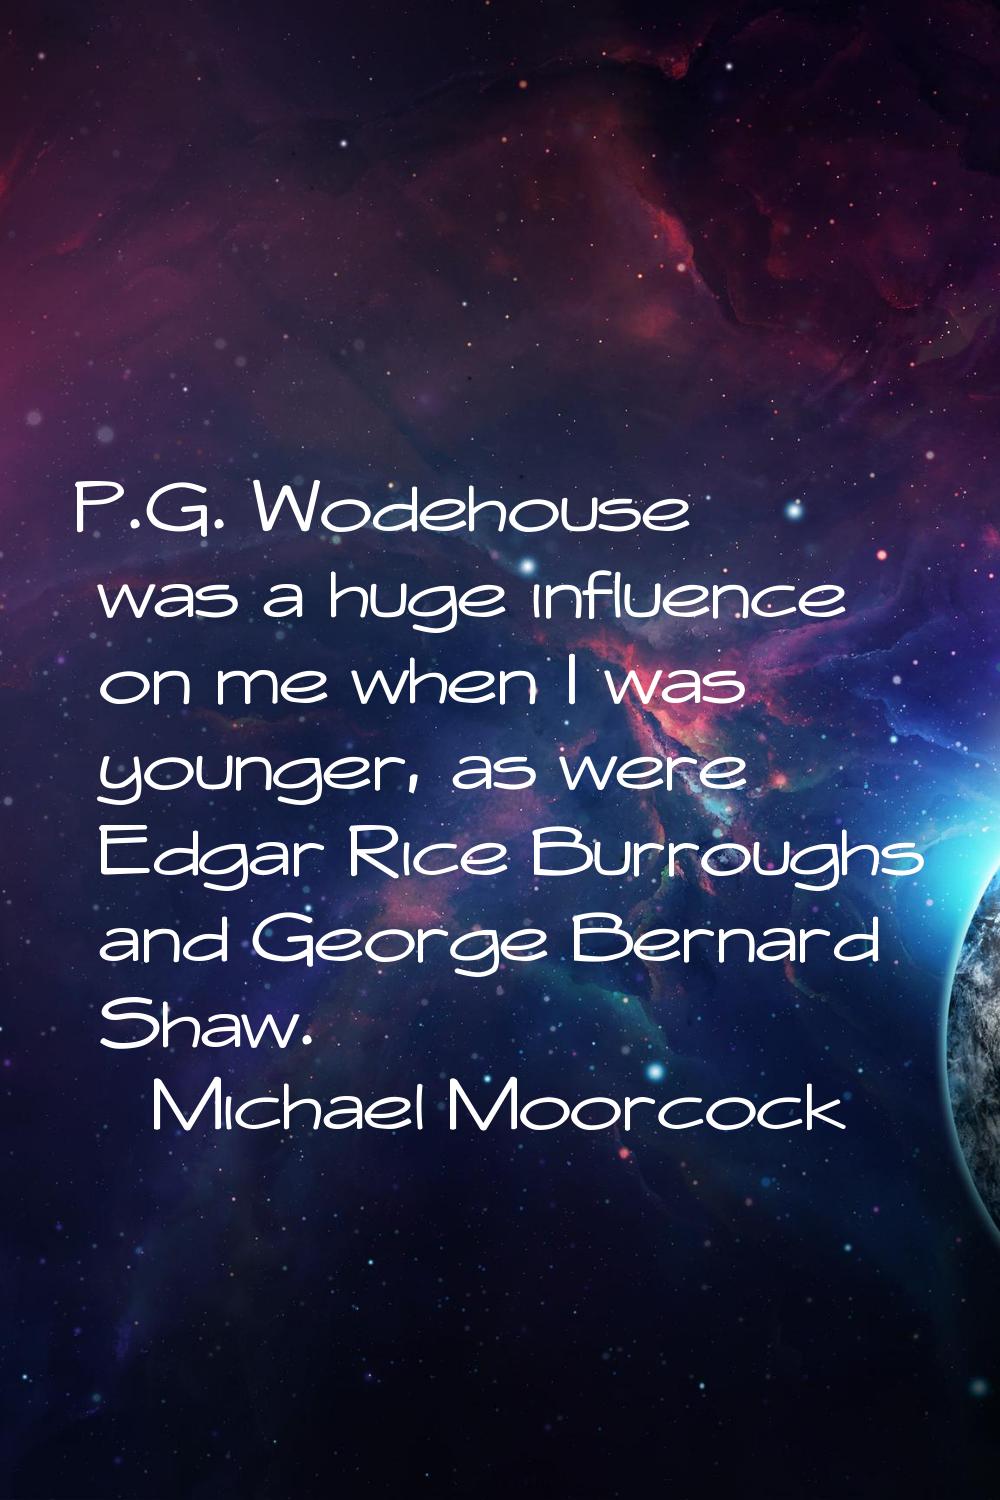 P.G. Wodehouse was a huge influence on me when I was younger, as were Edgar Rice Burroughs and Geor